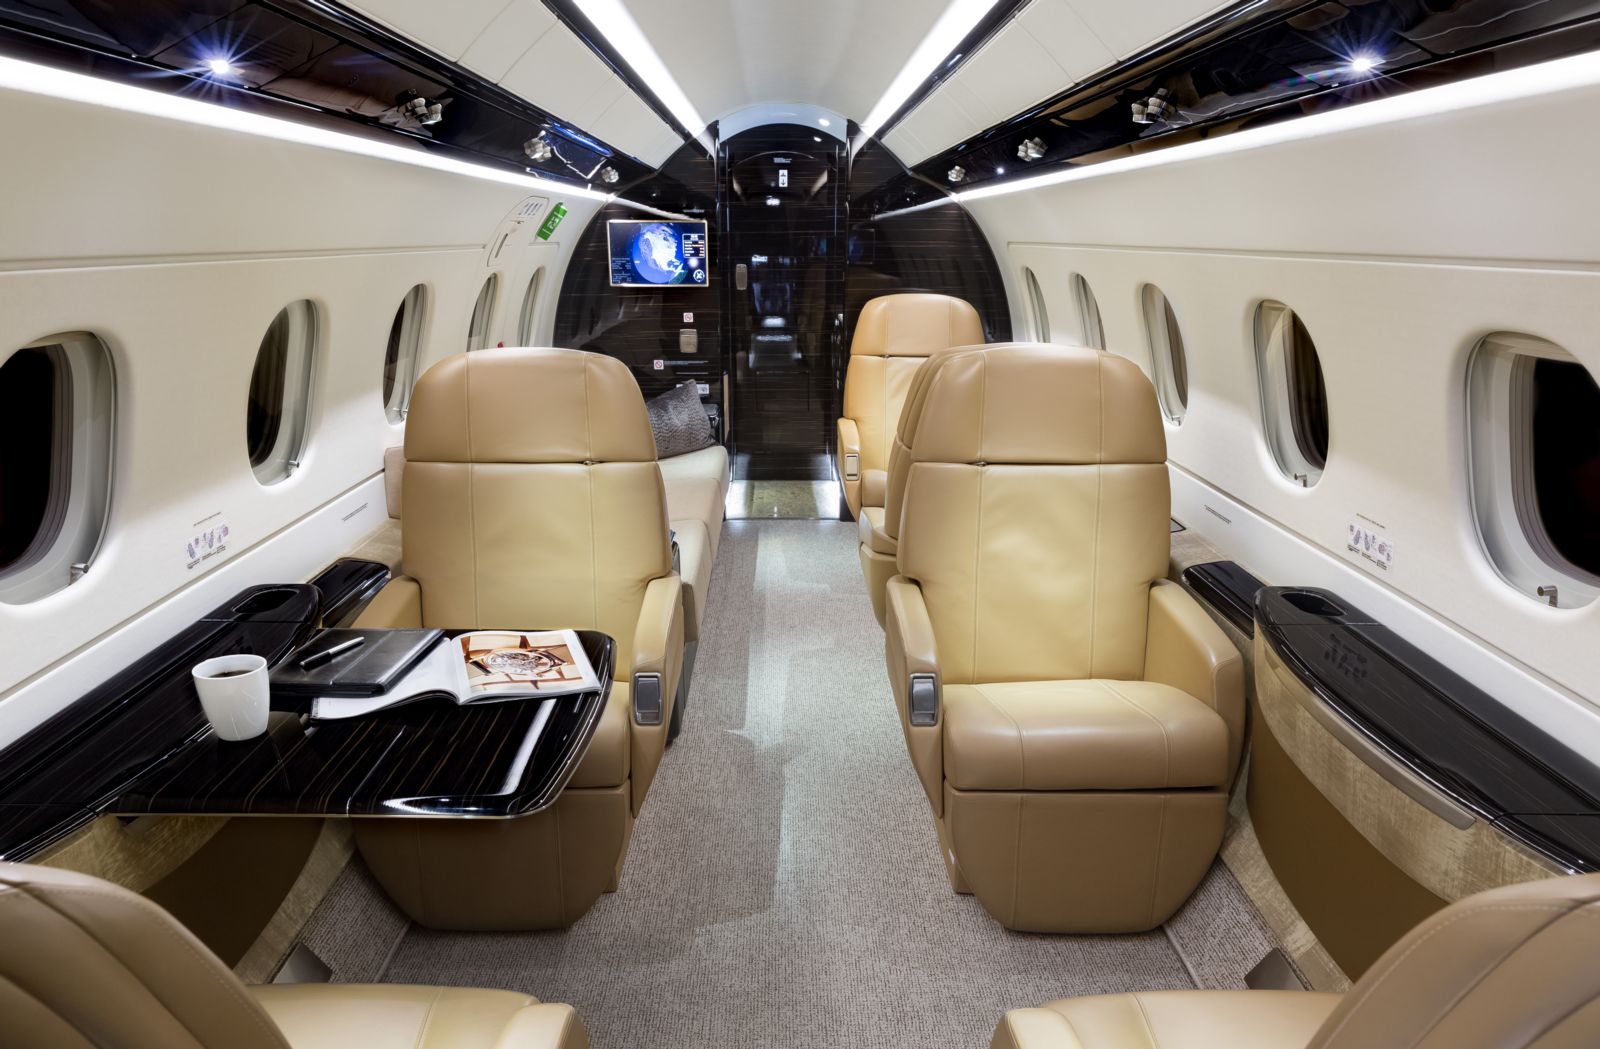 Embraer Legacy 500  S/N 55000049 for sale | gallery image: /userfiles/images/Legacy500_sn49/fwd%20aft%201%20.jpg